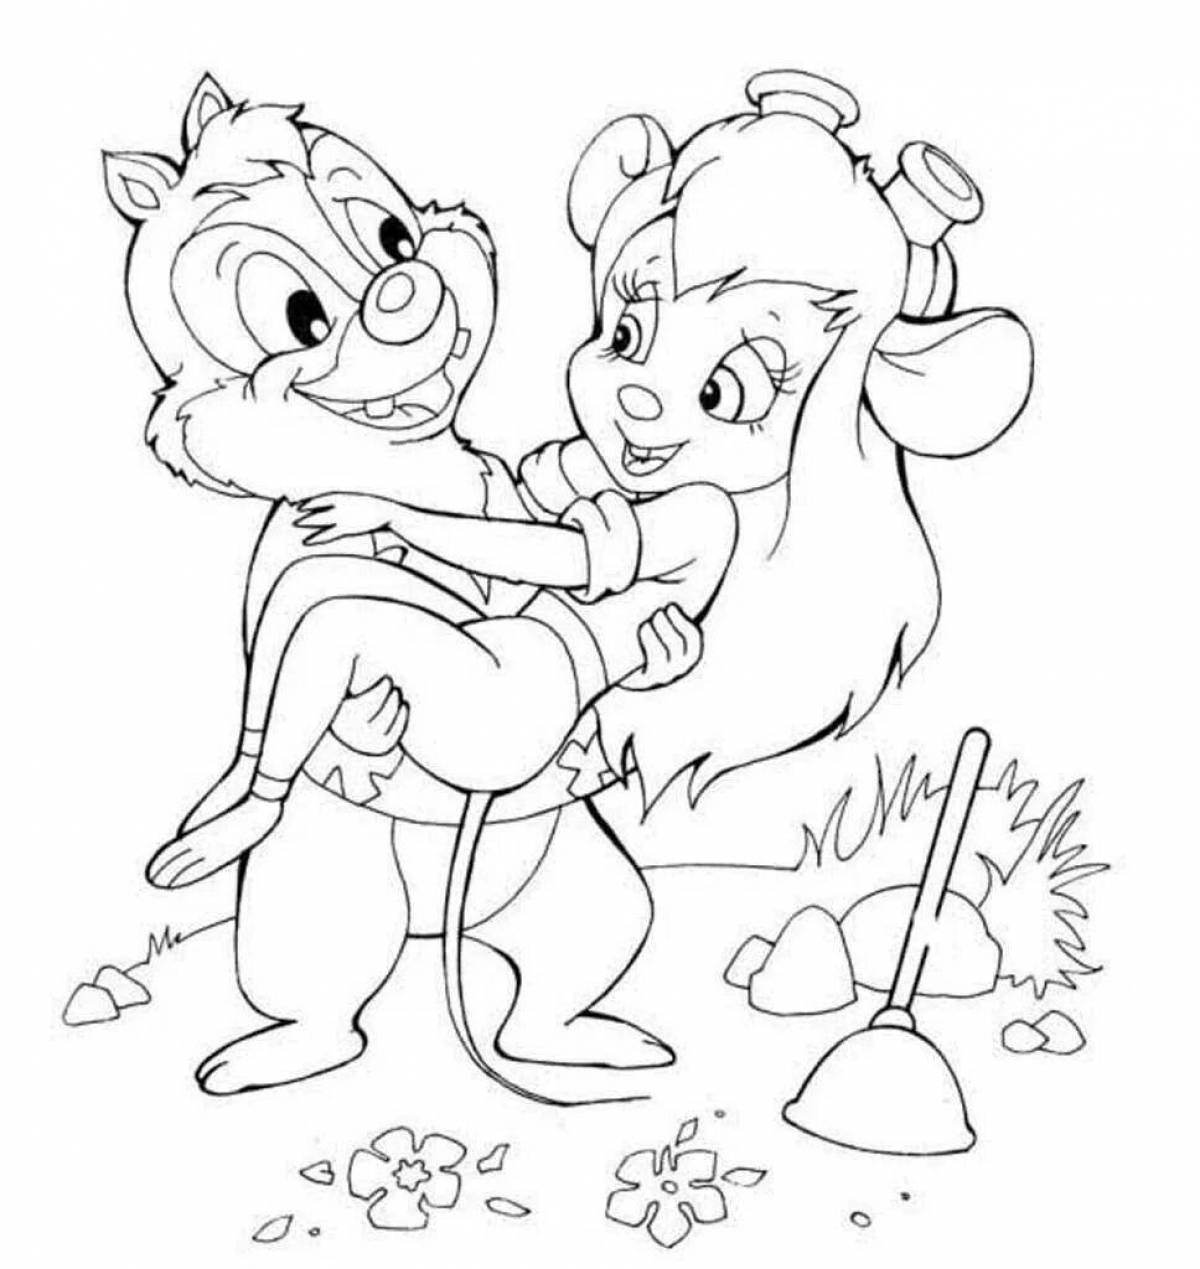 Vivacious chip and dale nut coloring page